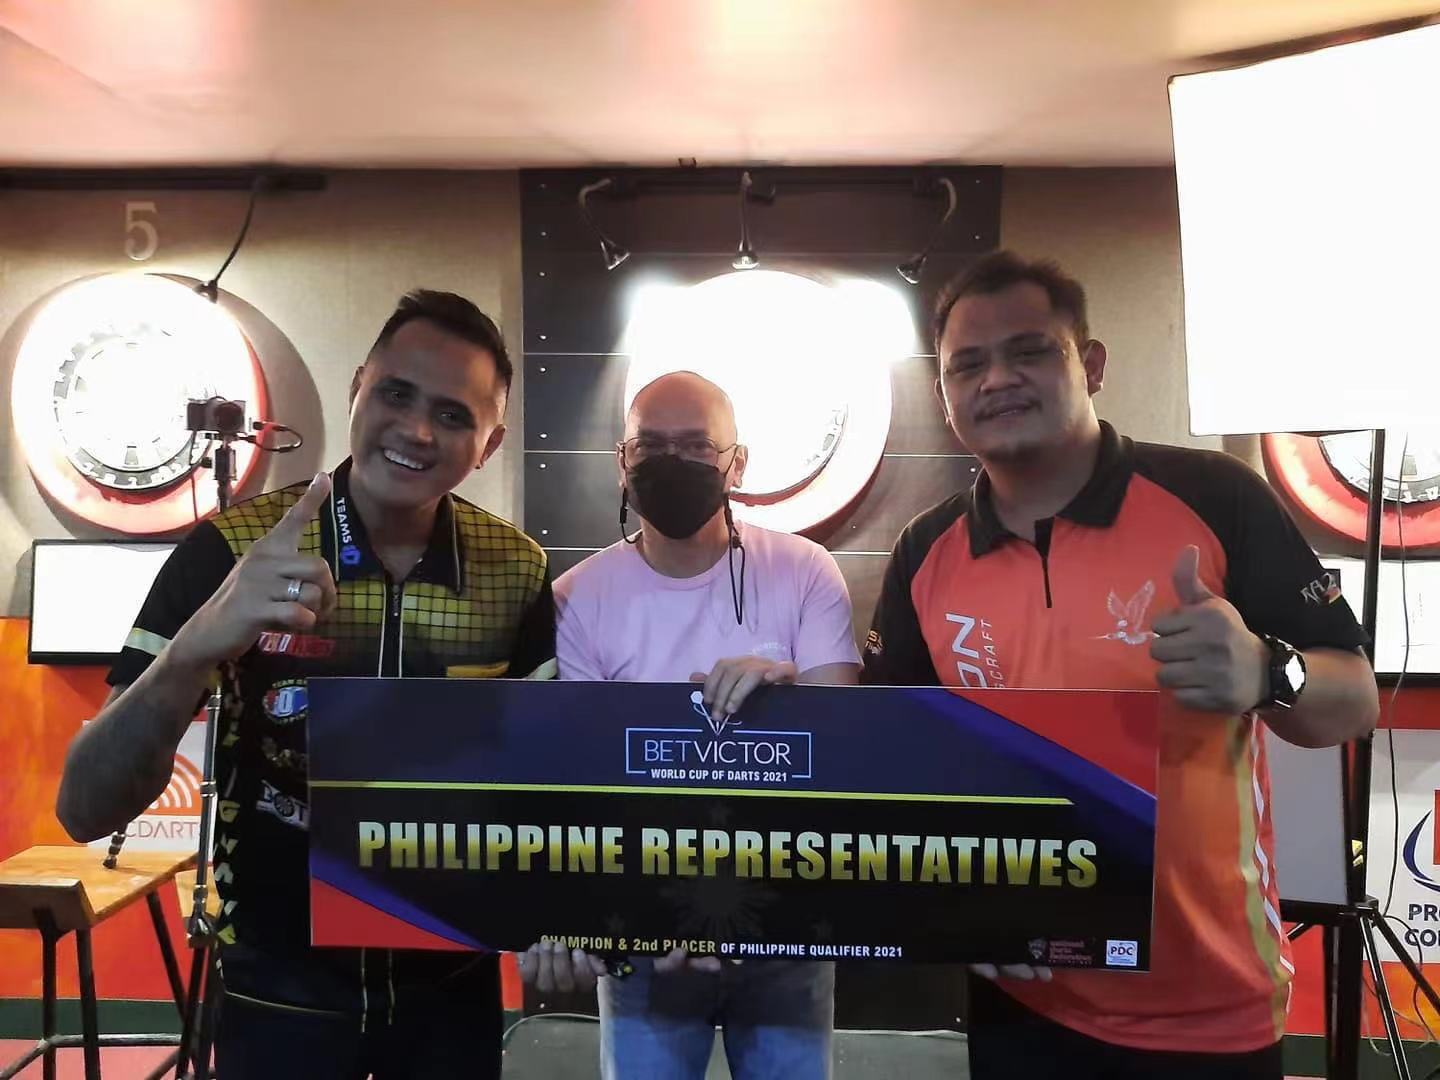 Ilagan qualifies for World Championship & will partner Nebrida at World Cup